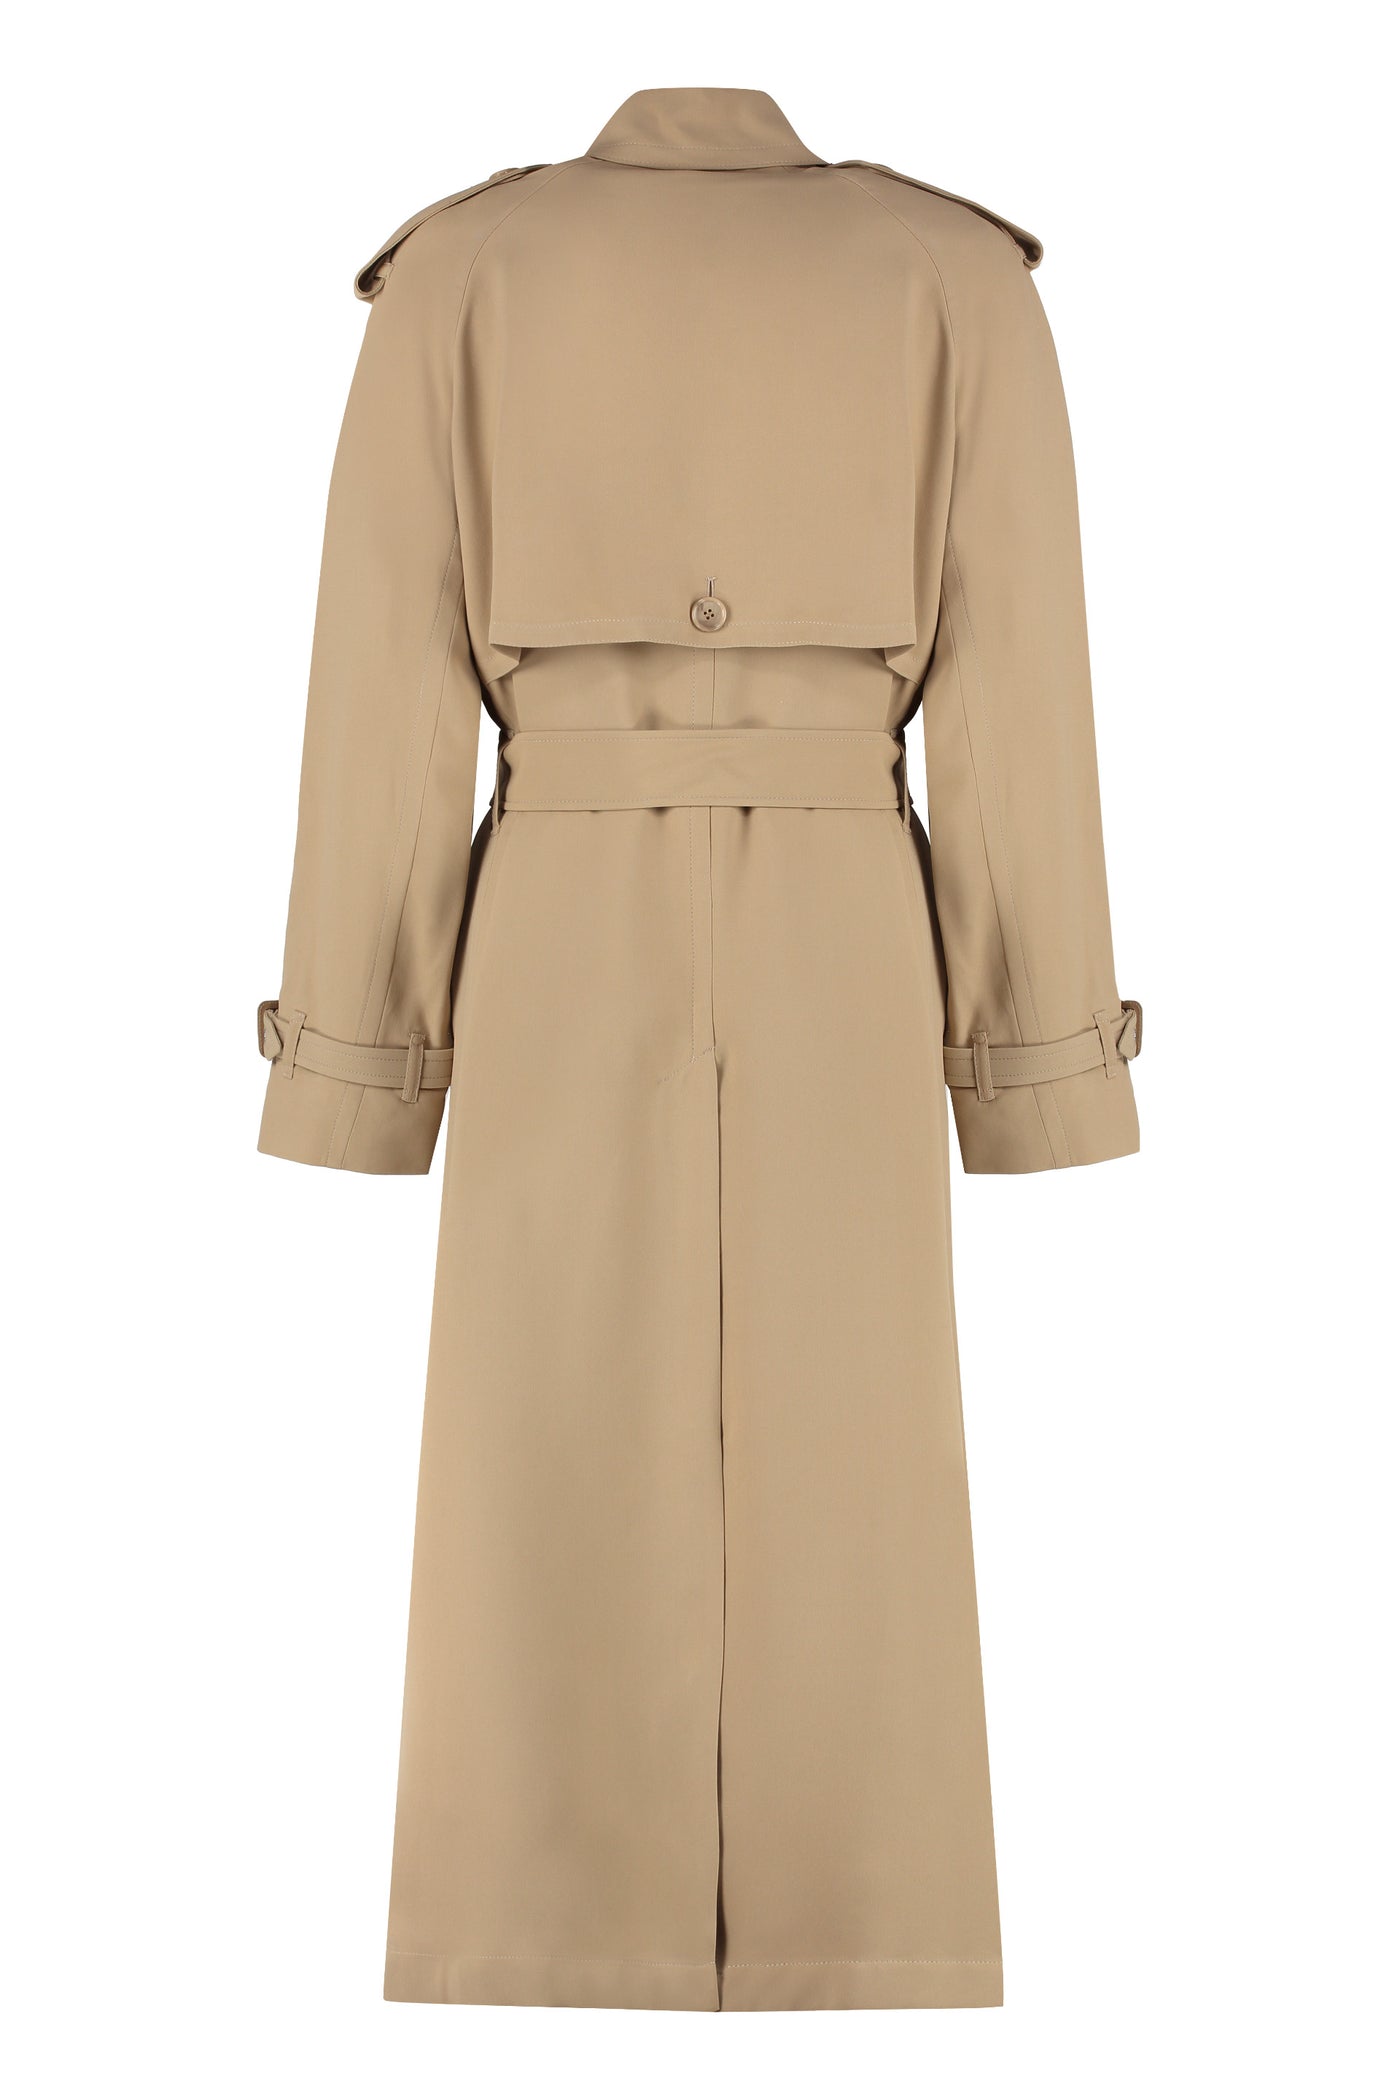 A7405 BURBERRY LONG TRENCH COAT